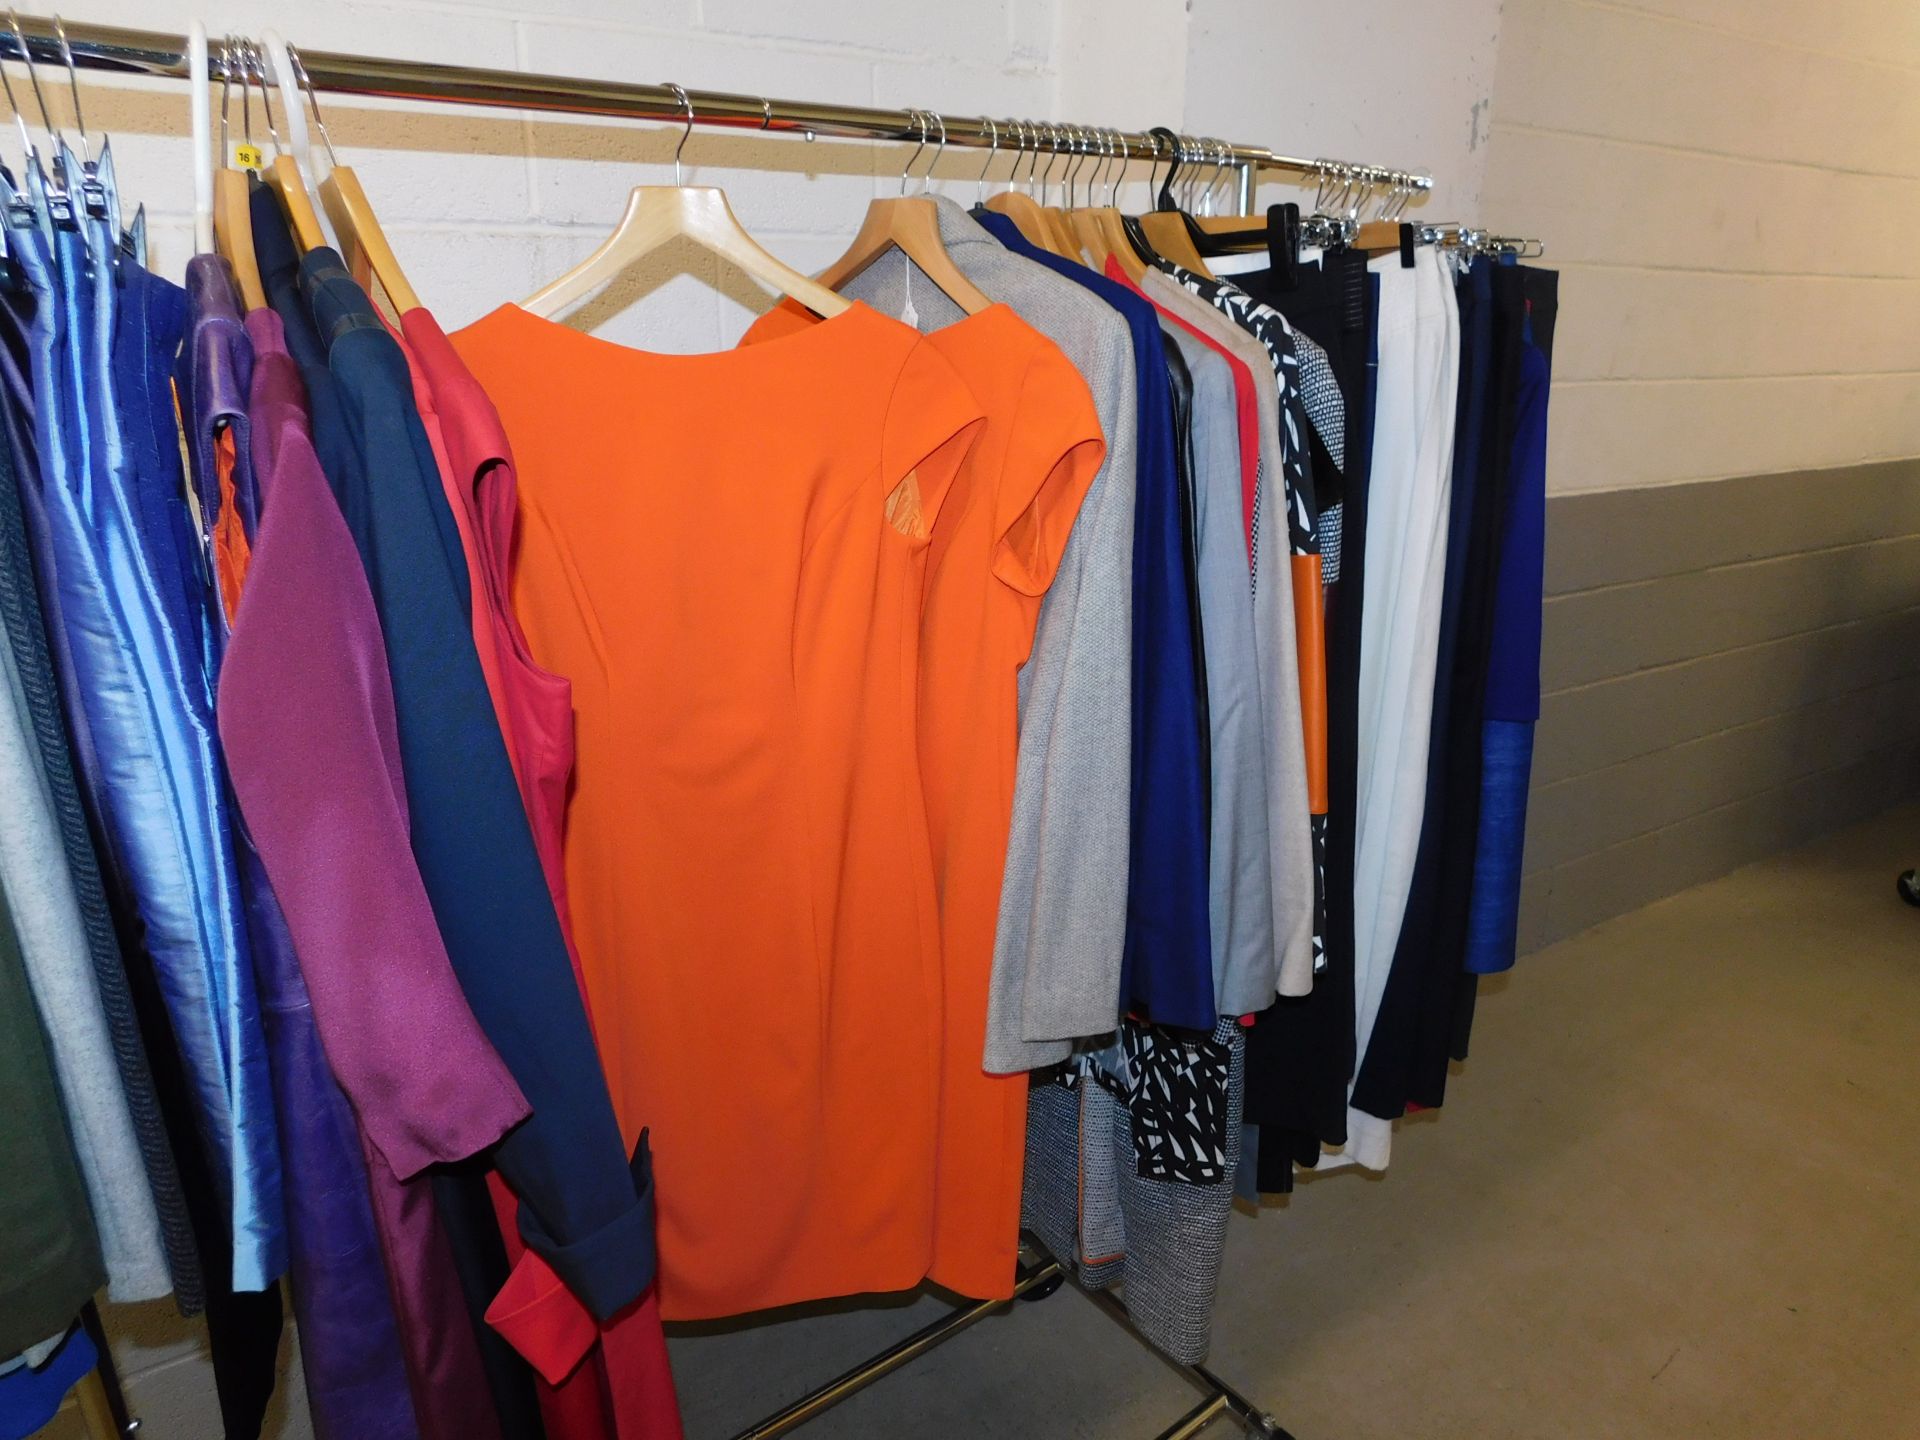 Contents of Rail of "Number 35" Ladies Business Wear, Size 10 (21 Skirts, 9 Tops/Dresses,  11 Jacket - Image 4 of 7